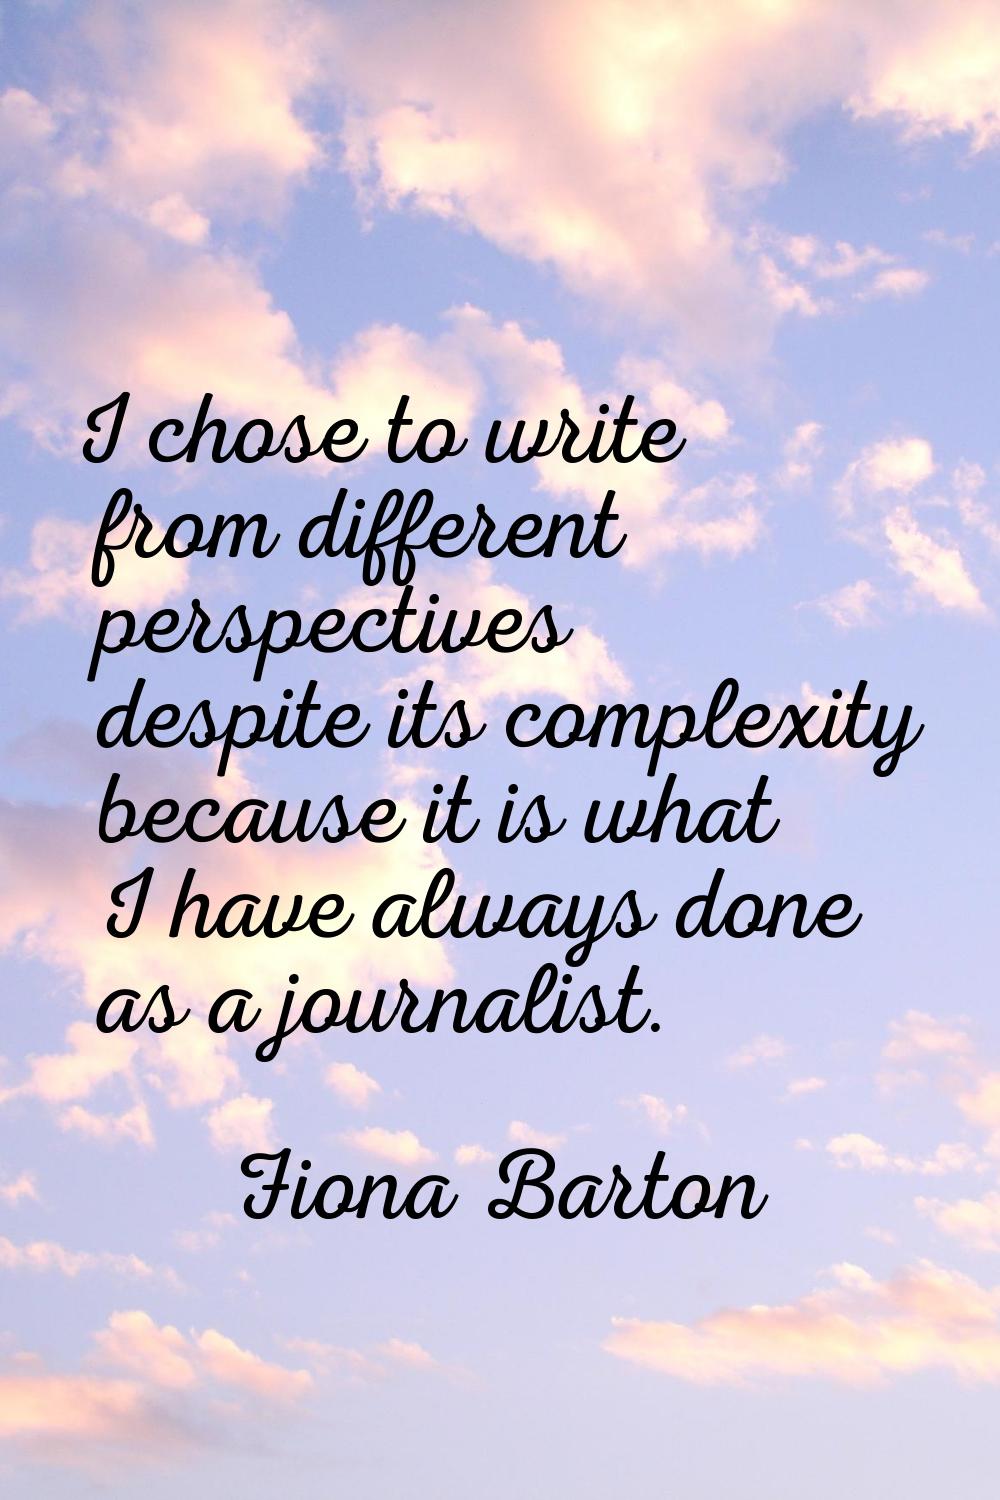 I chose to write from different perspectives despite its complexity because it is what I have alway